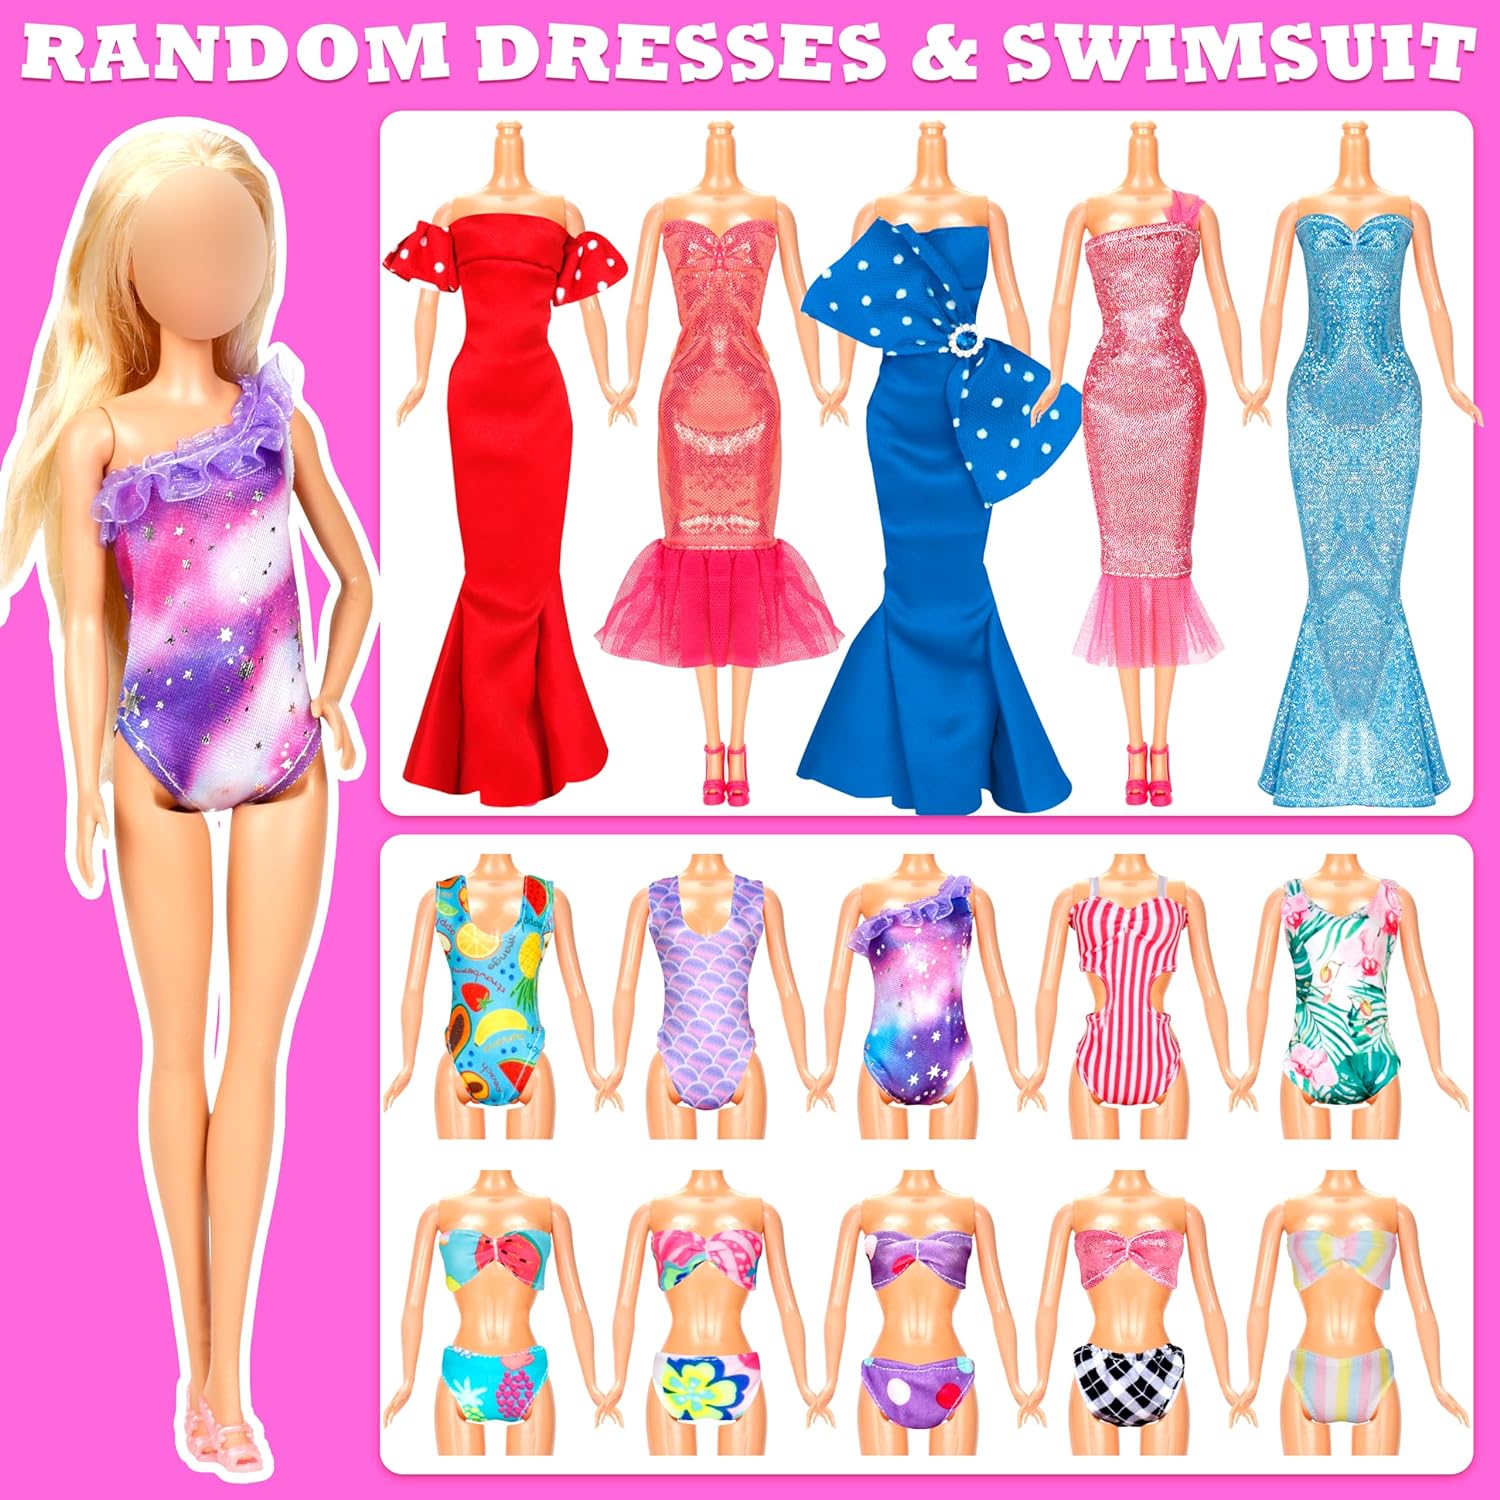 58 Pcs Doll Clothes and Accessories, 5 Wedding Gowns 5 Fashion Dresses 4 Slip Dresses 3 Tops 3 Pants 3 Bikini Swimsuits 20 Shoes Cykapu